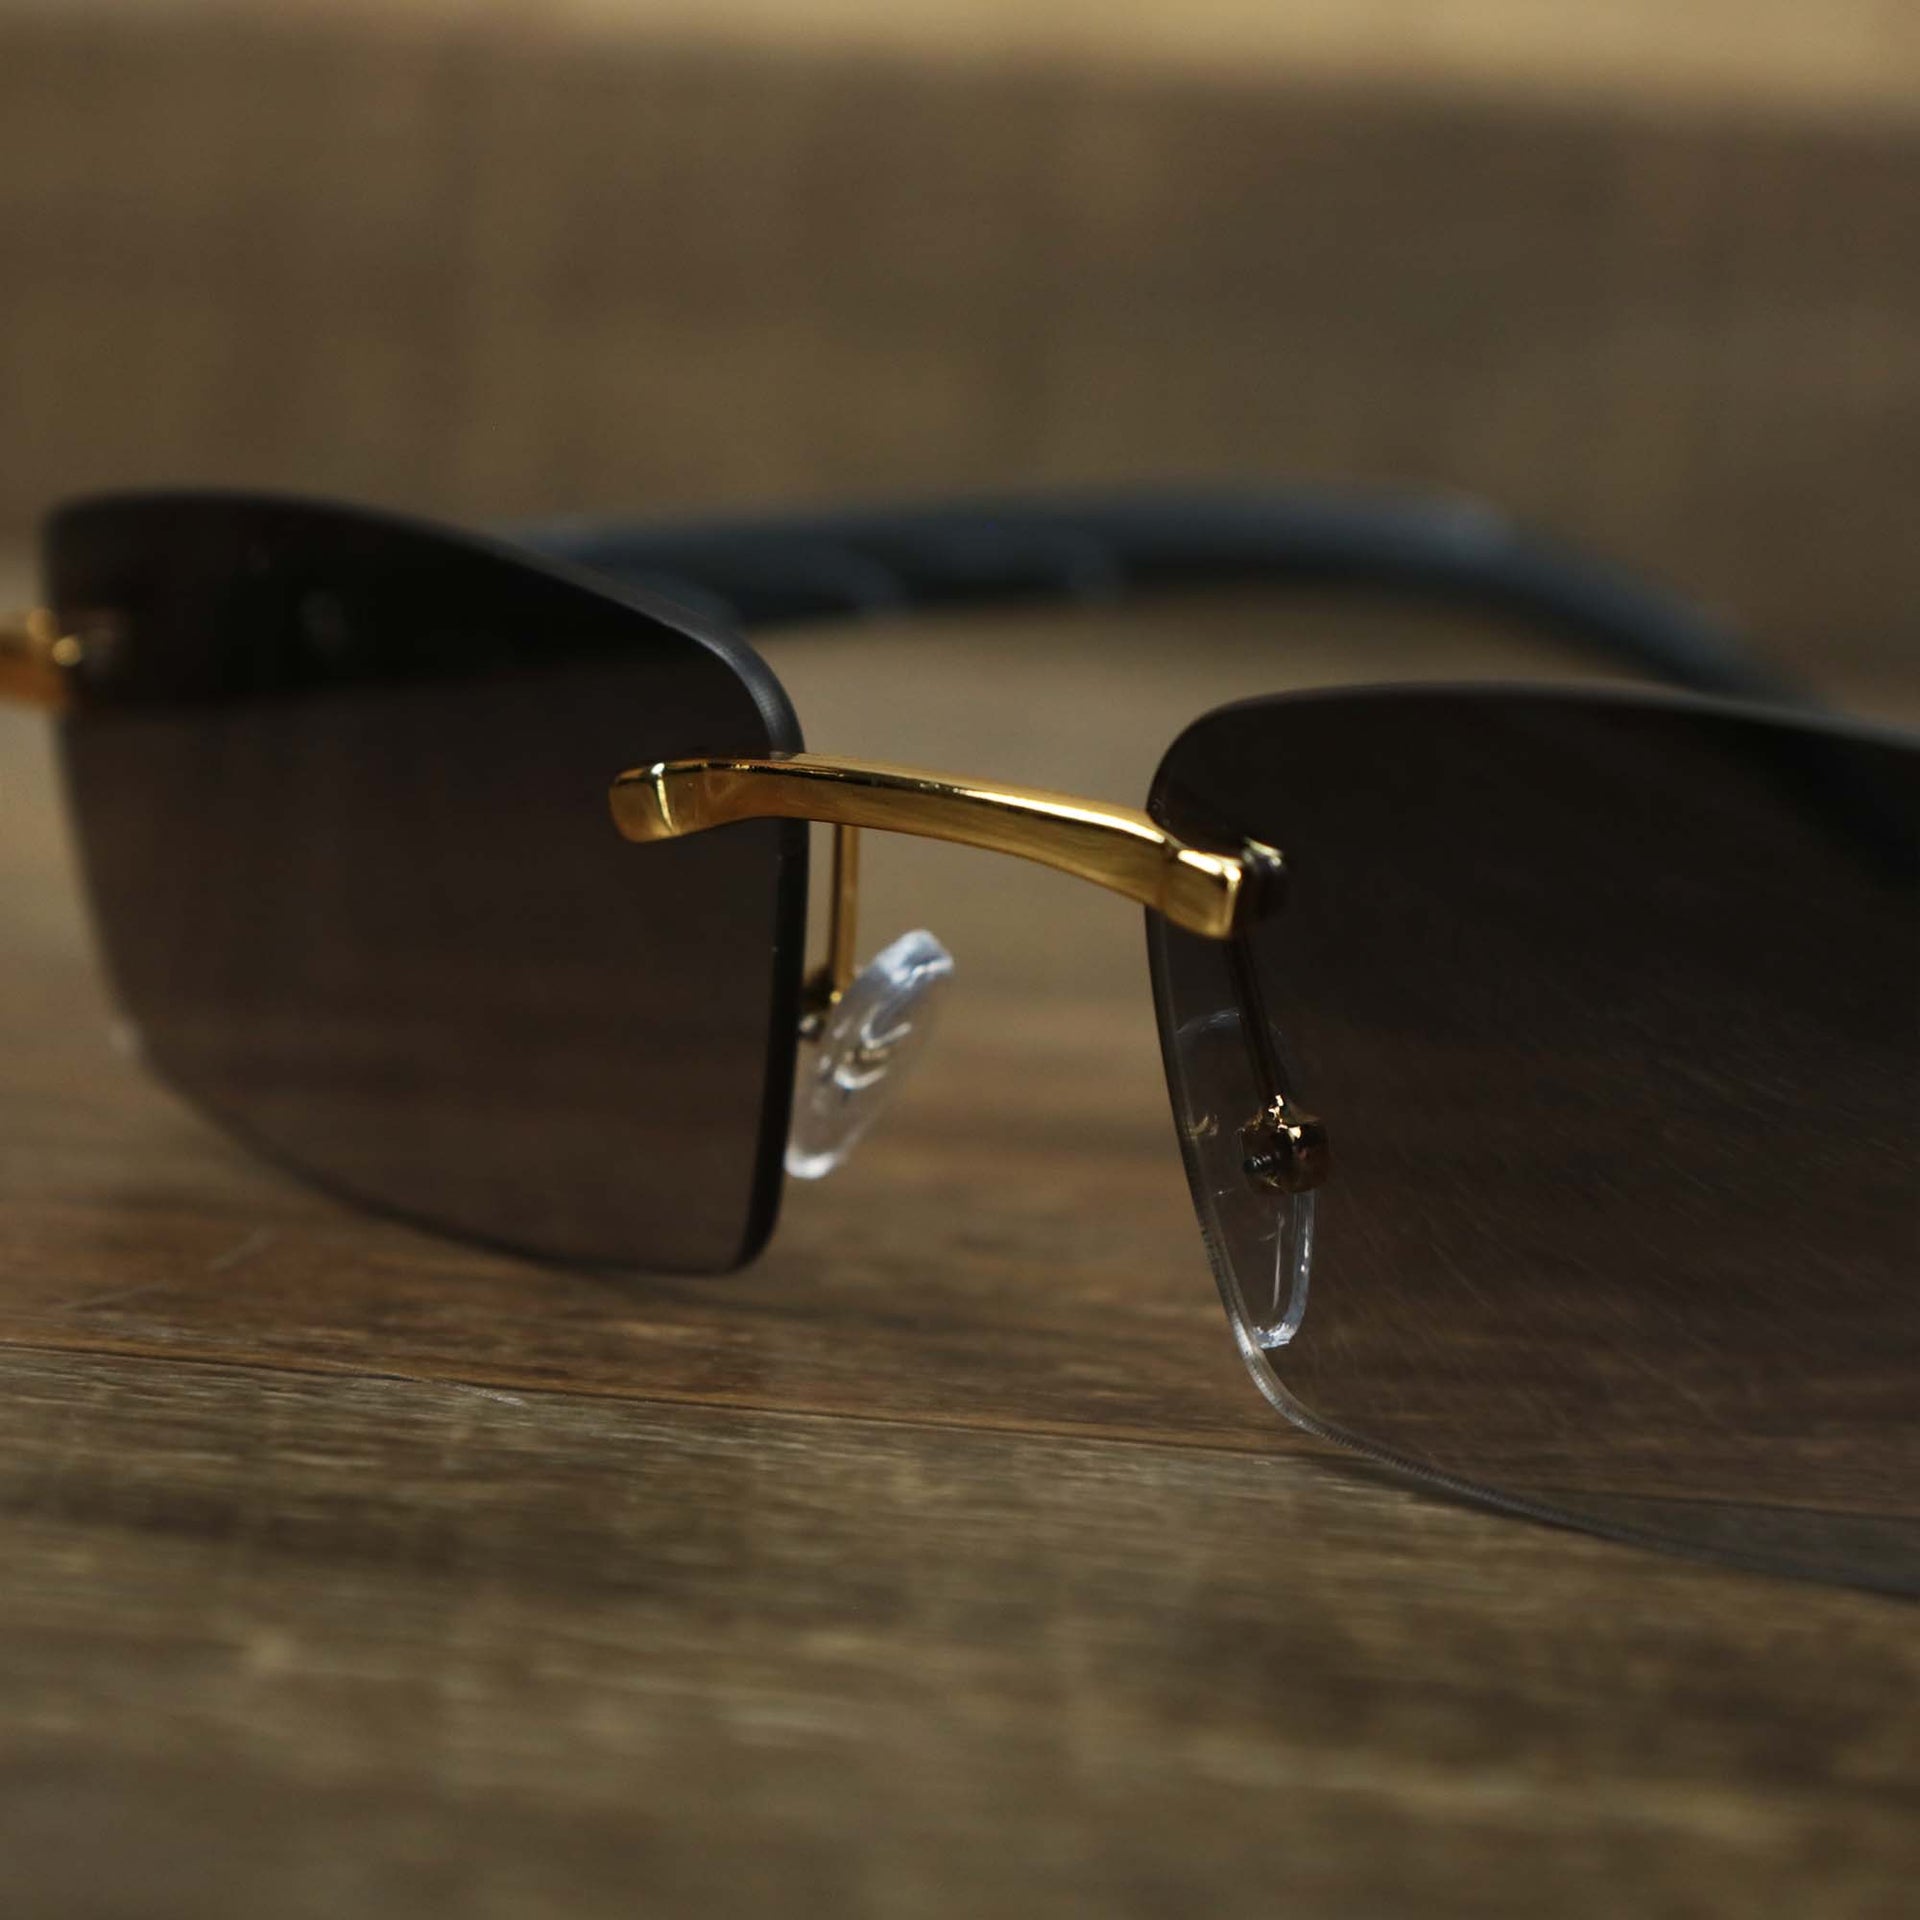 The bridge of the Rectangle Wood and Metal Frame Black Lens Sunglasses with Gold Frame